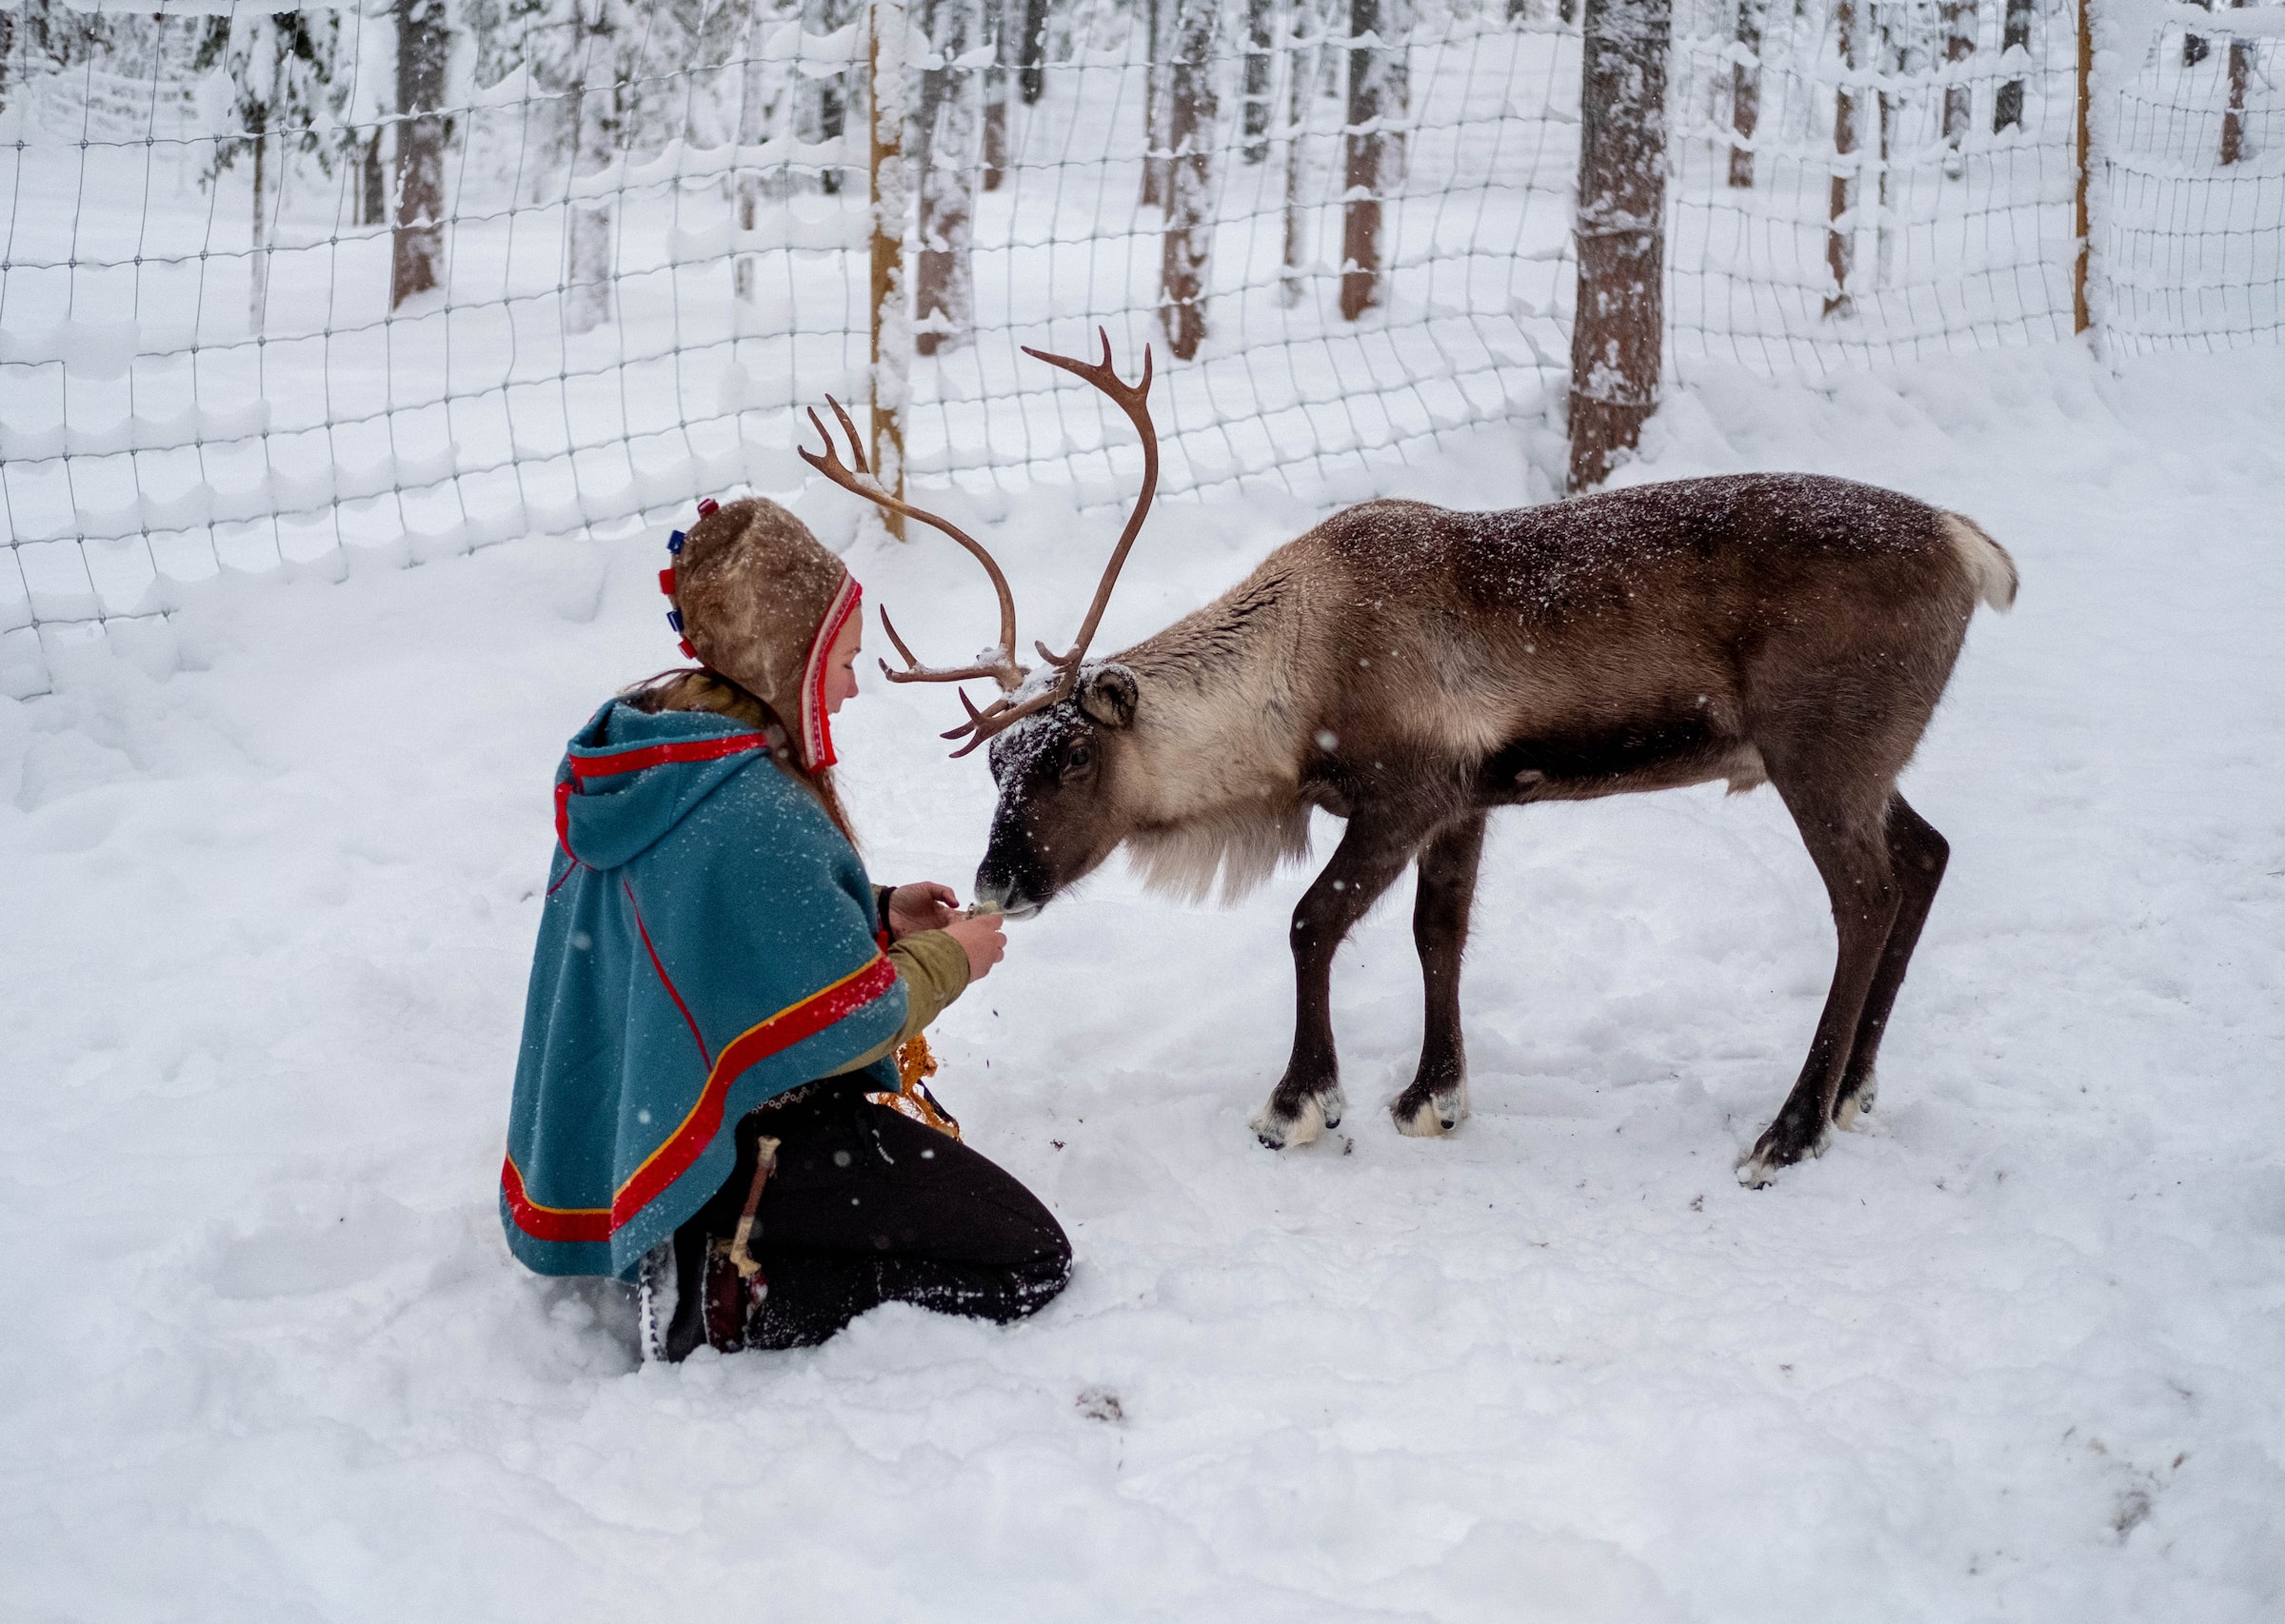 A sami person with reindeer in Sweden